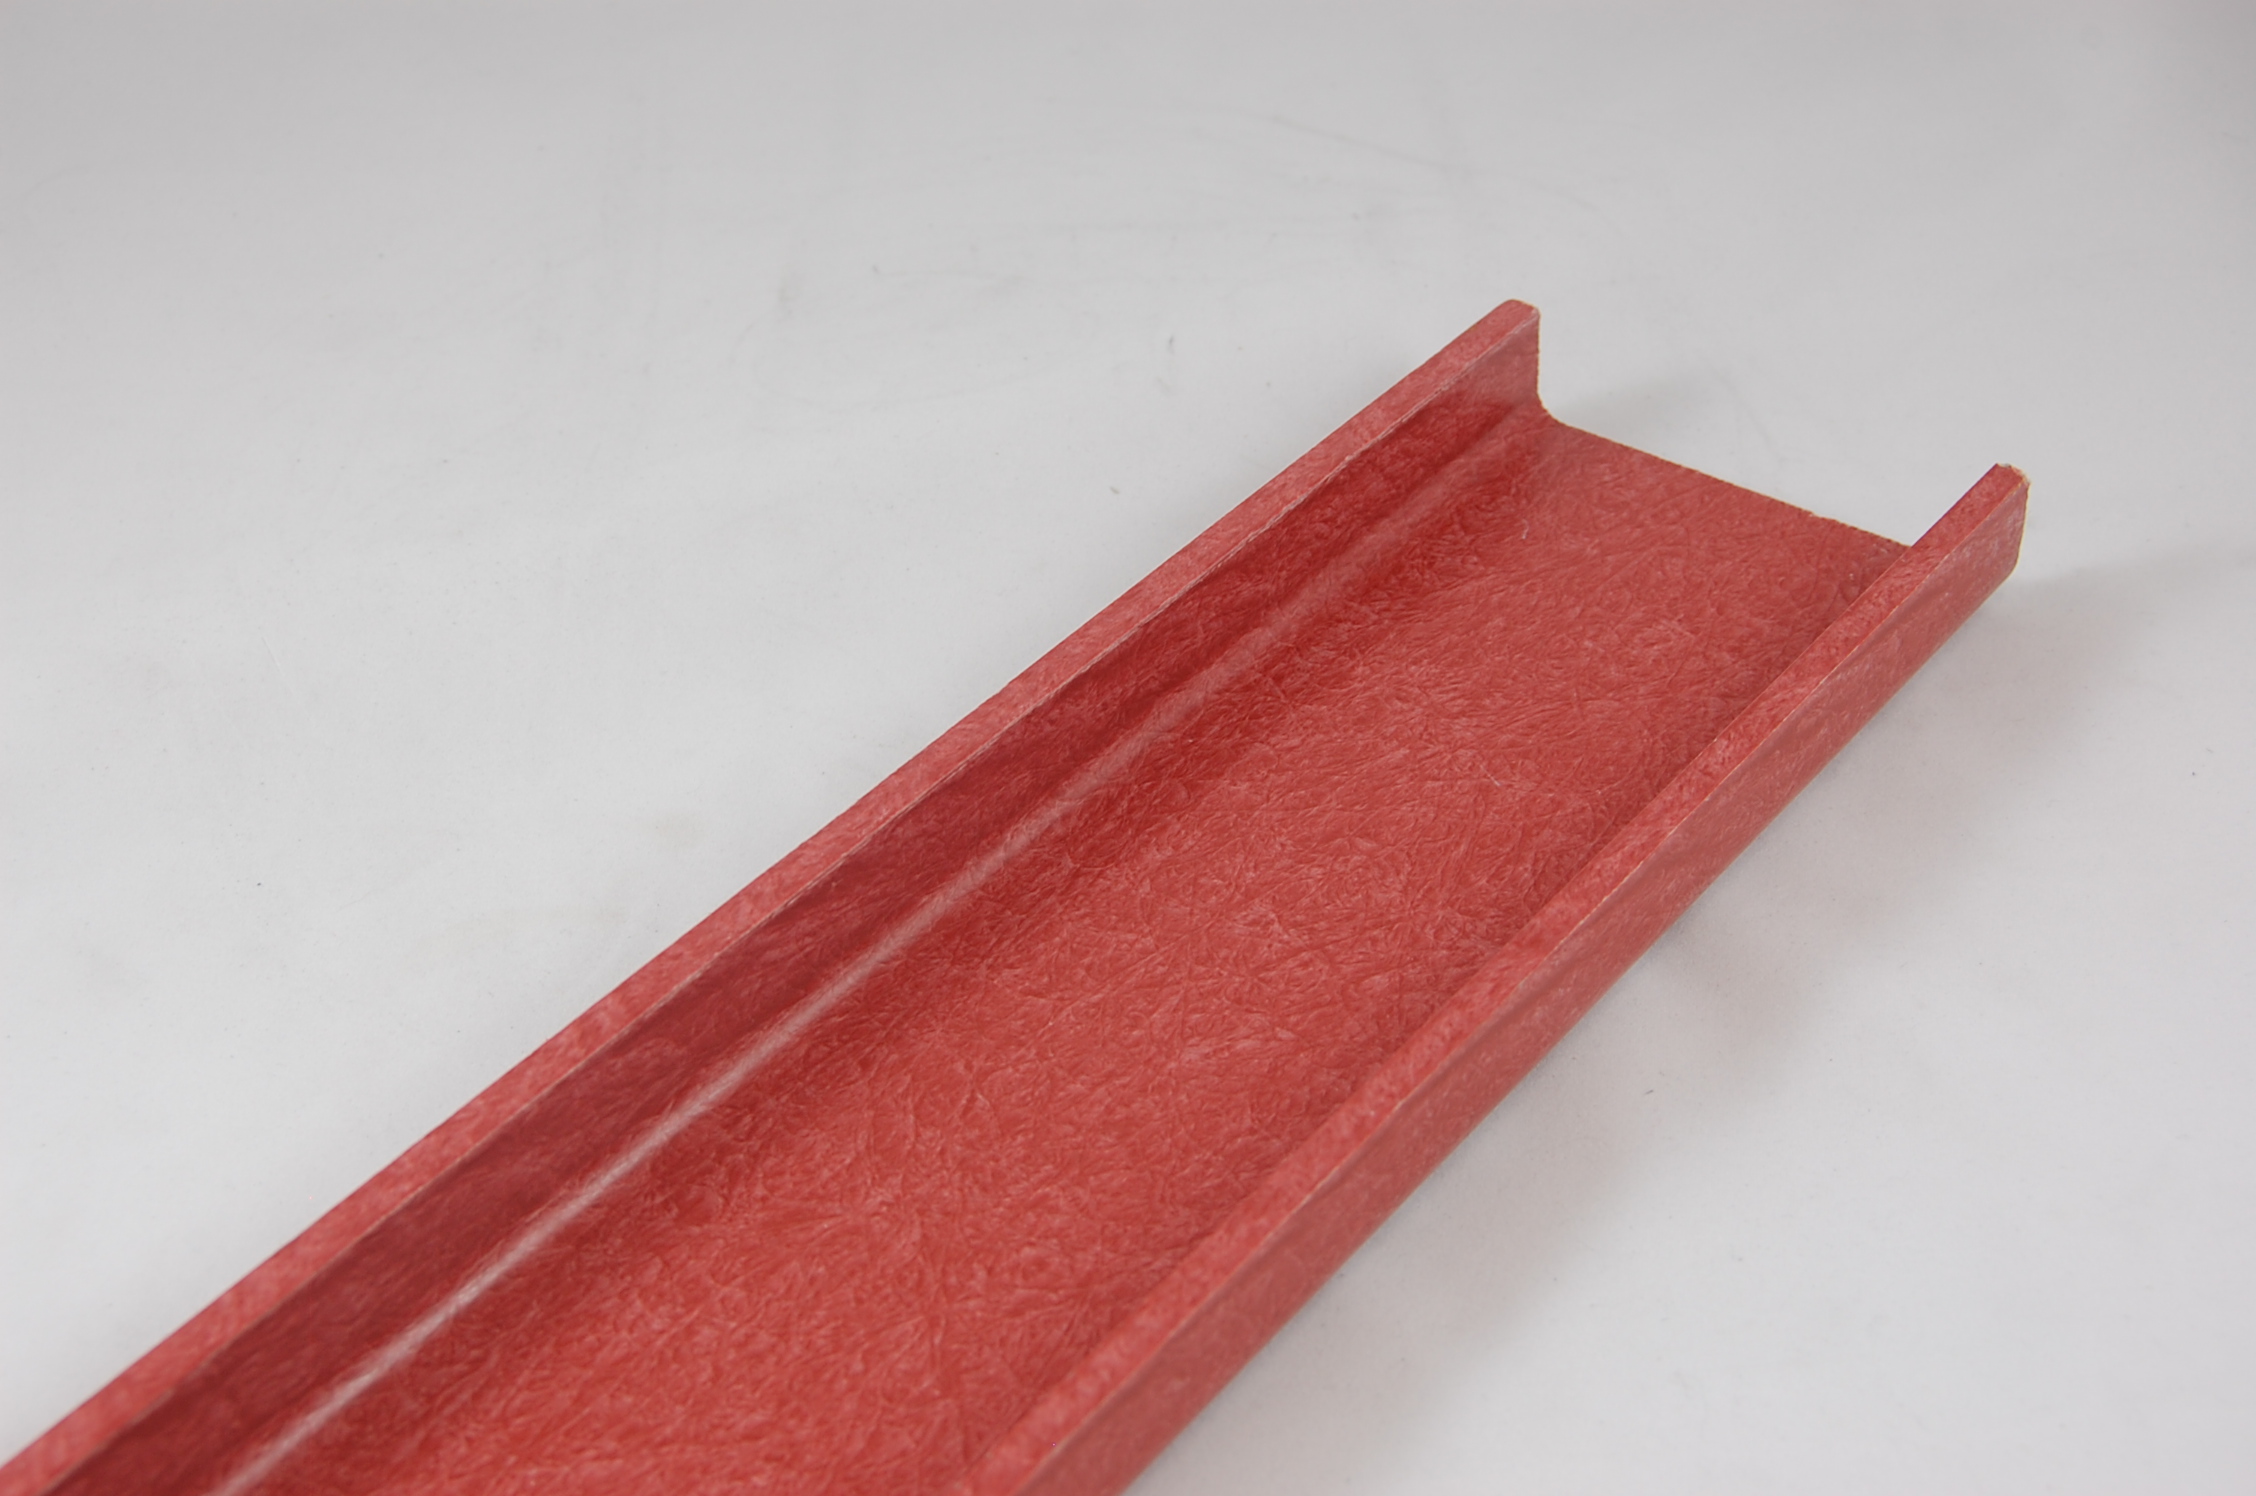 4-1/2"W x 2-1/2" Leg x 1/4" thick GLASROD® Grade 1130 Fiberglass-Reinforced Polyester Laminate Channel, red,  120"L channel